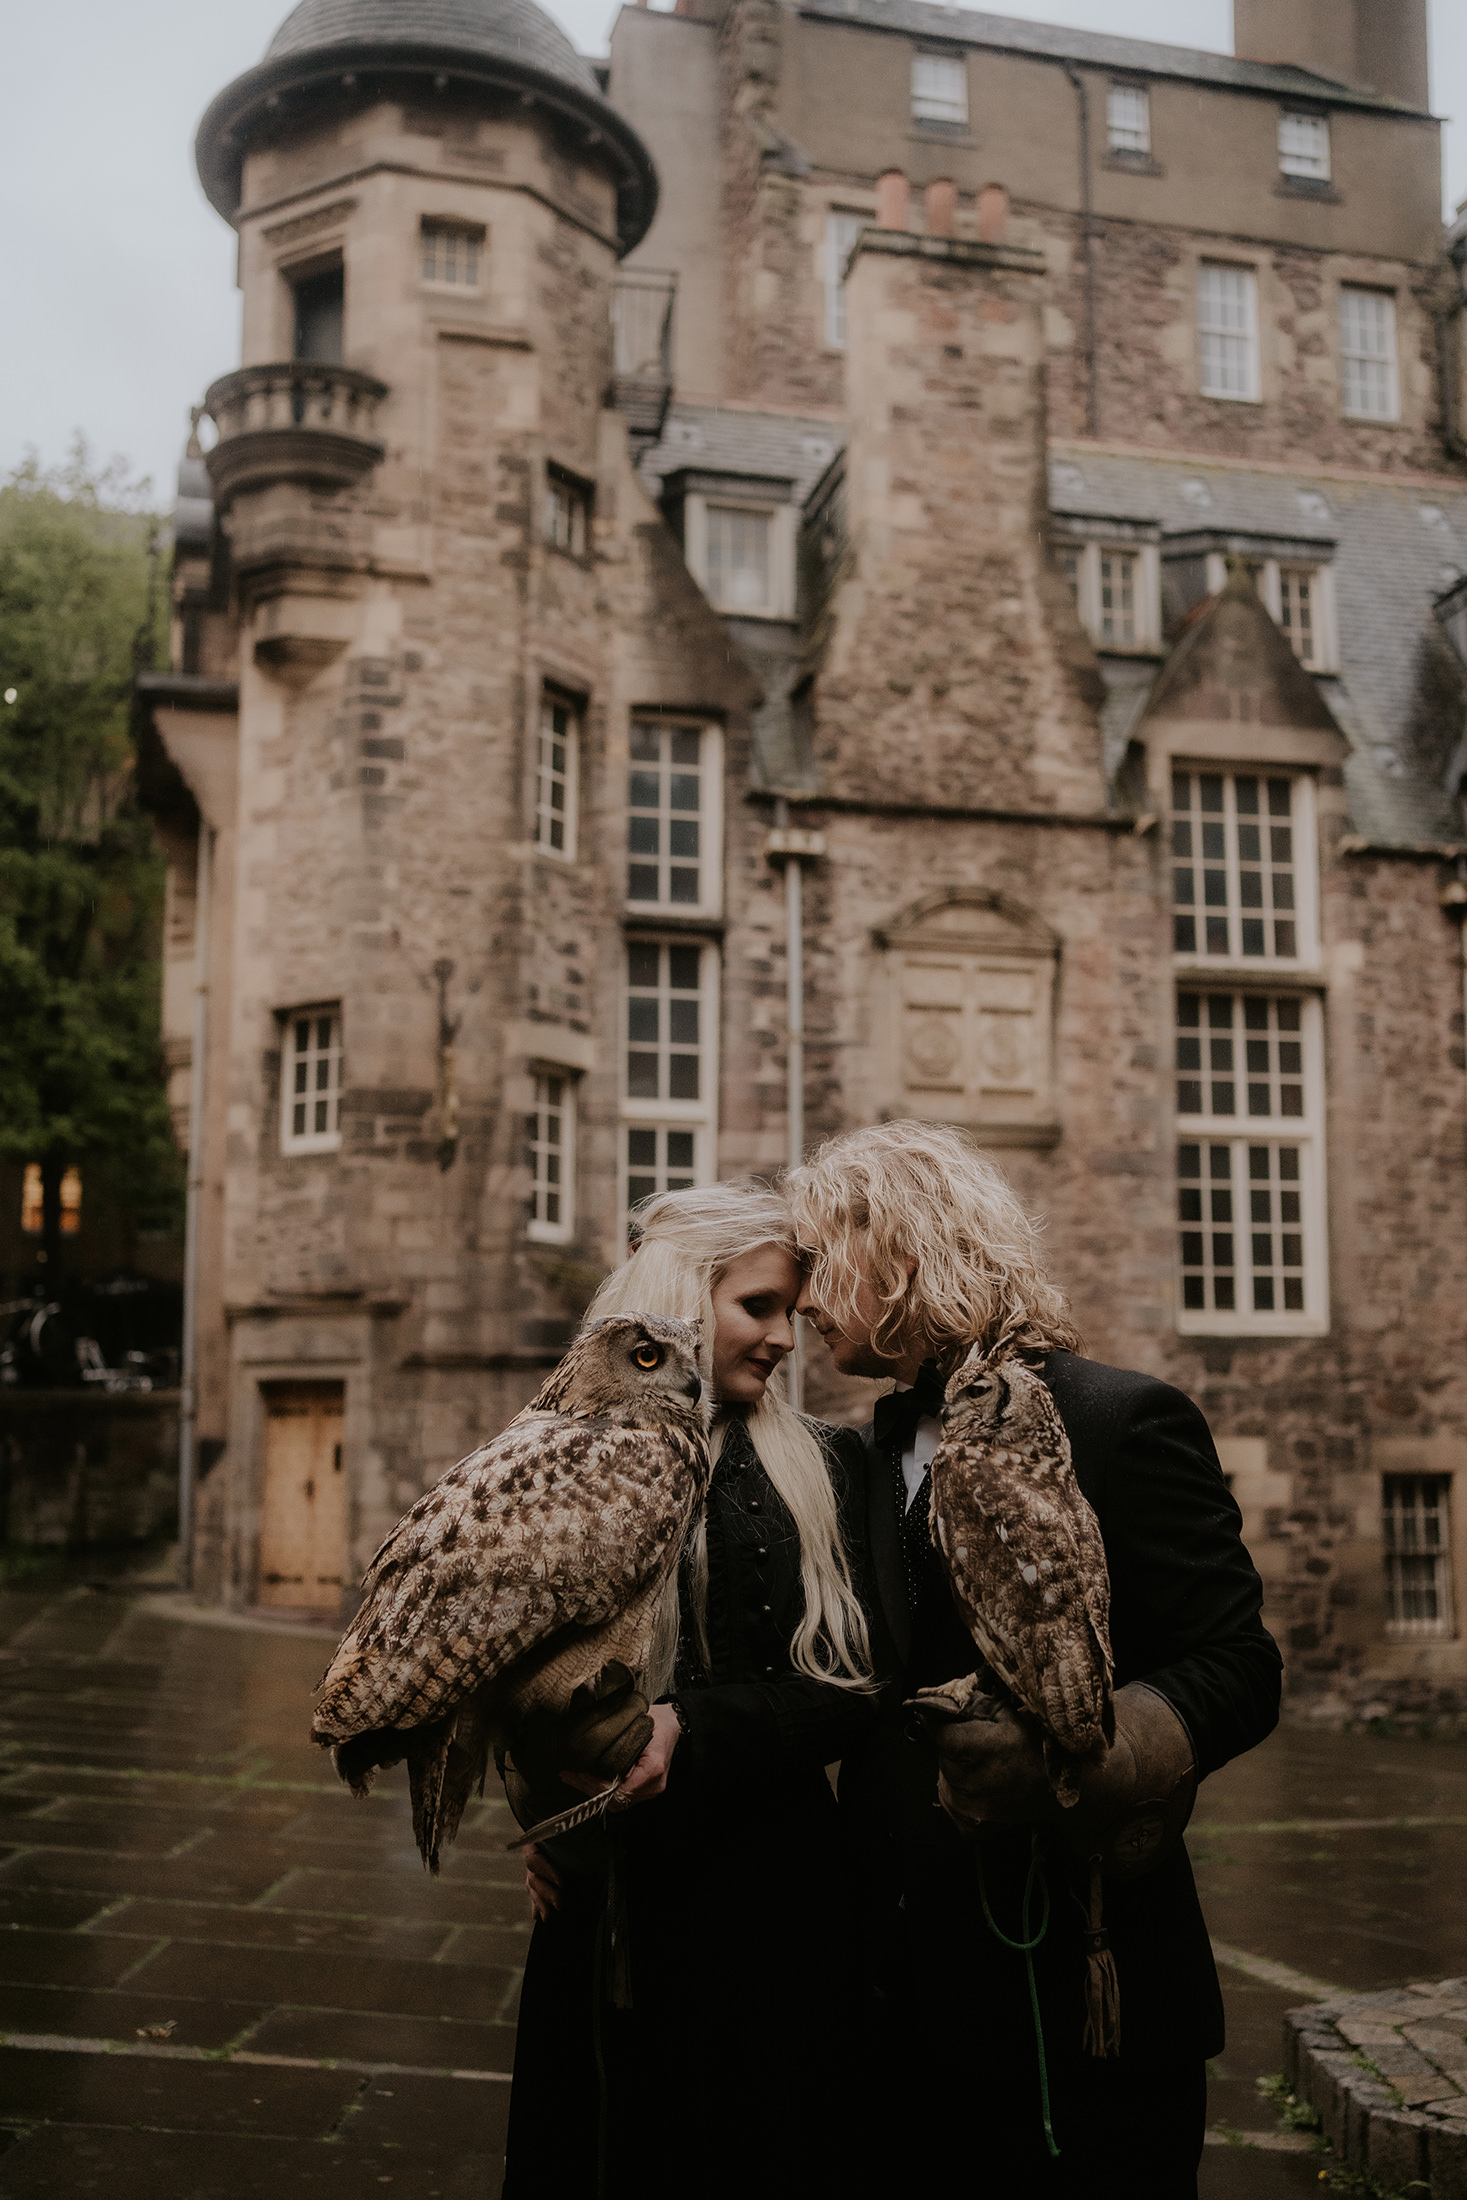 Couple photoshoot with owls in Edinburgh Old town